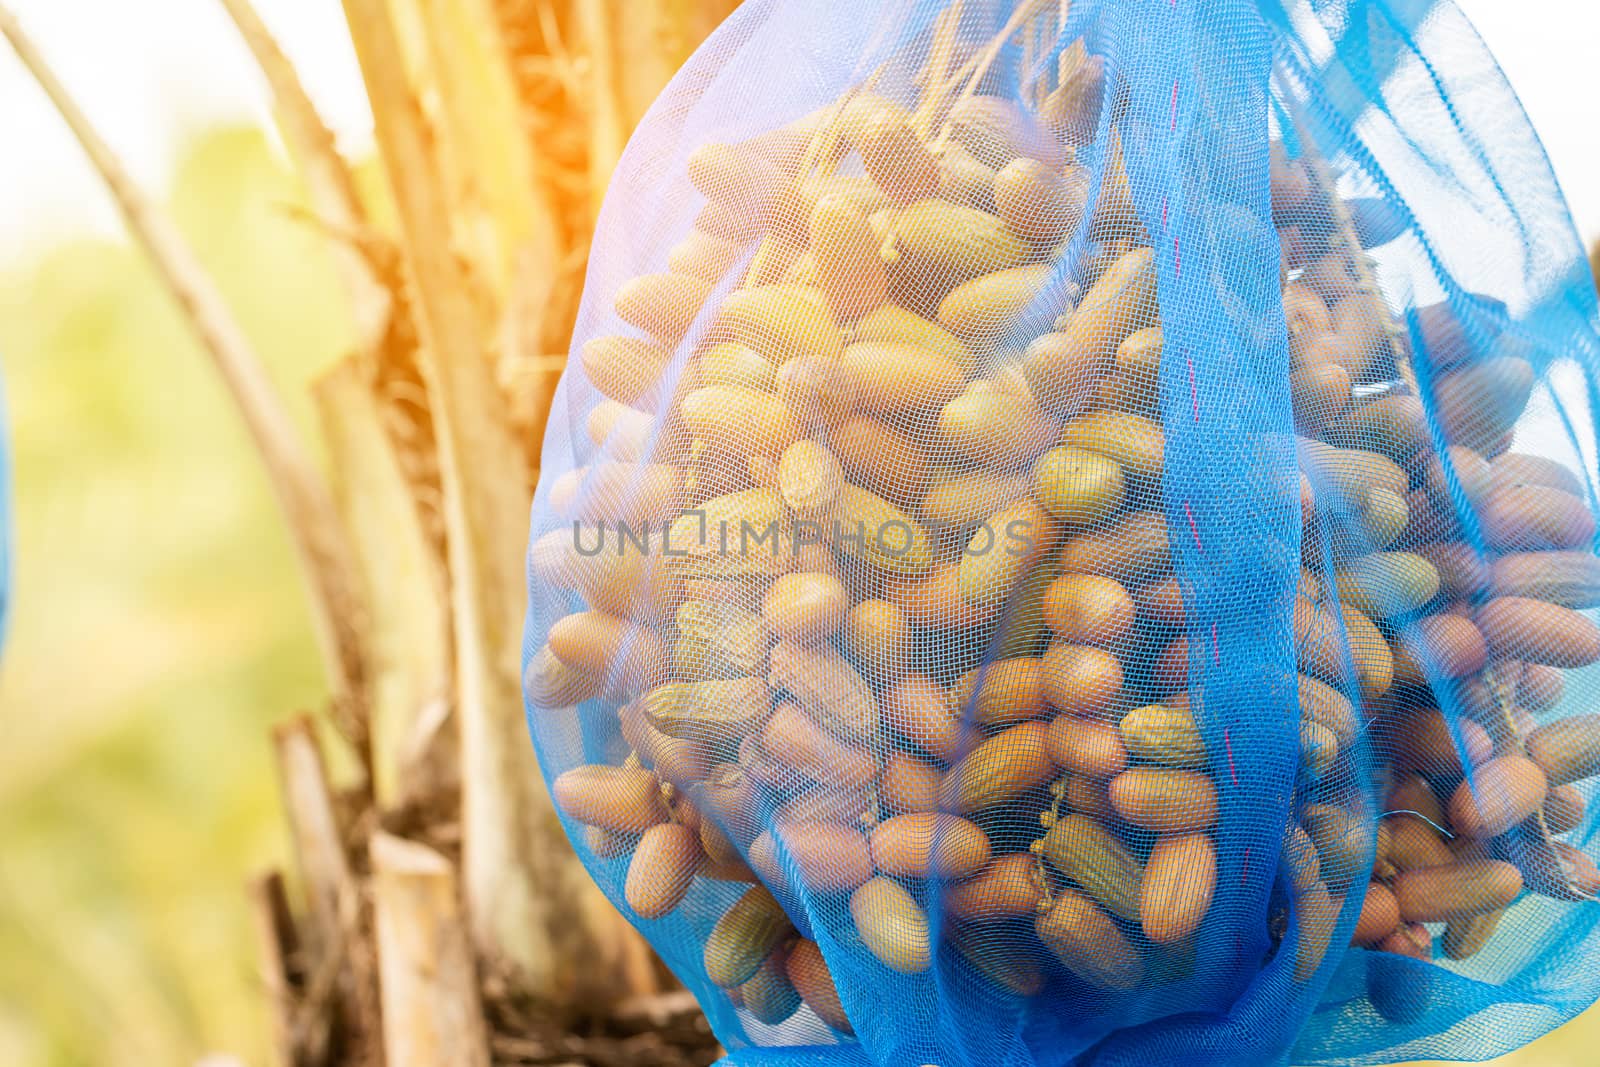 Dates palm branches with ripe dates by freedomnaruk